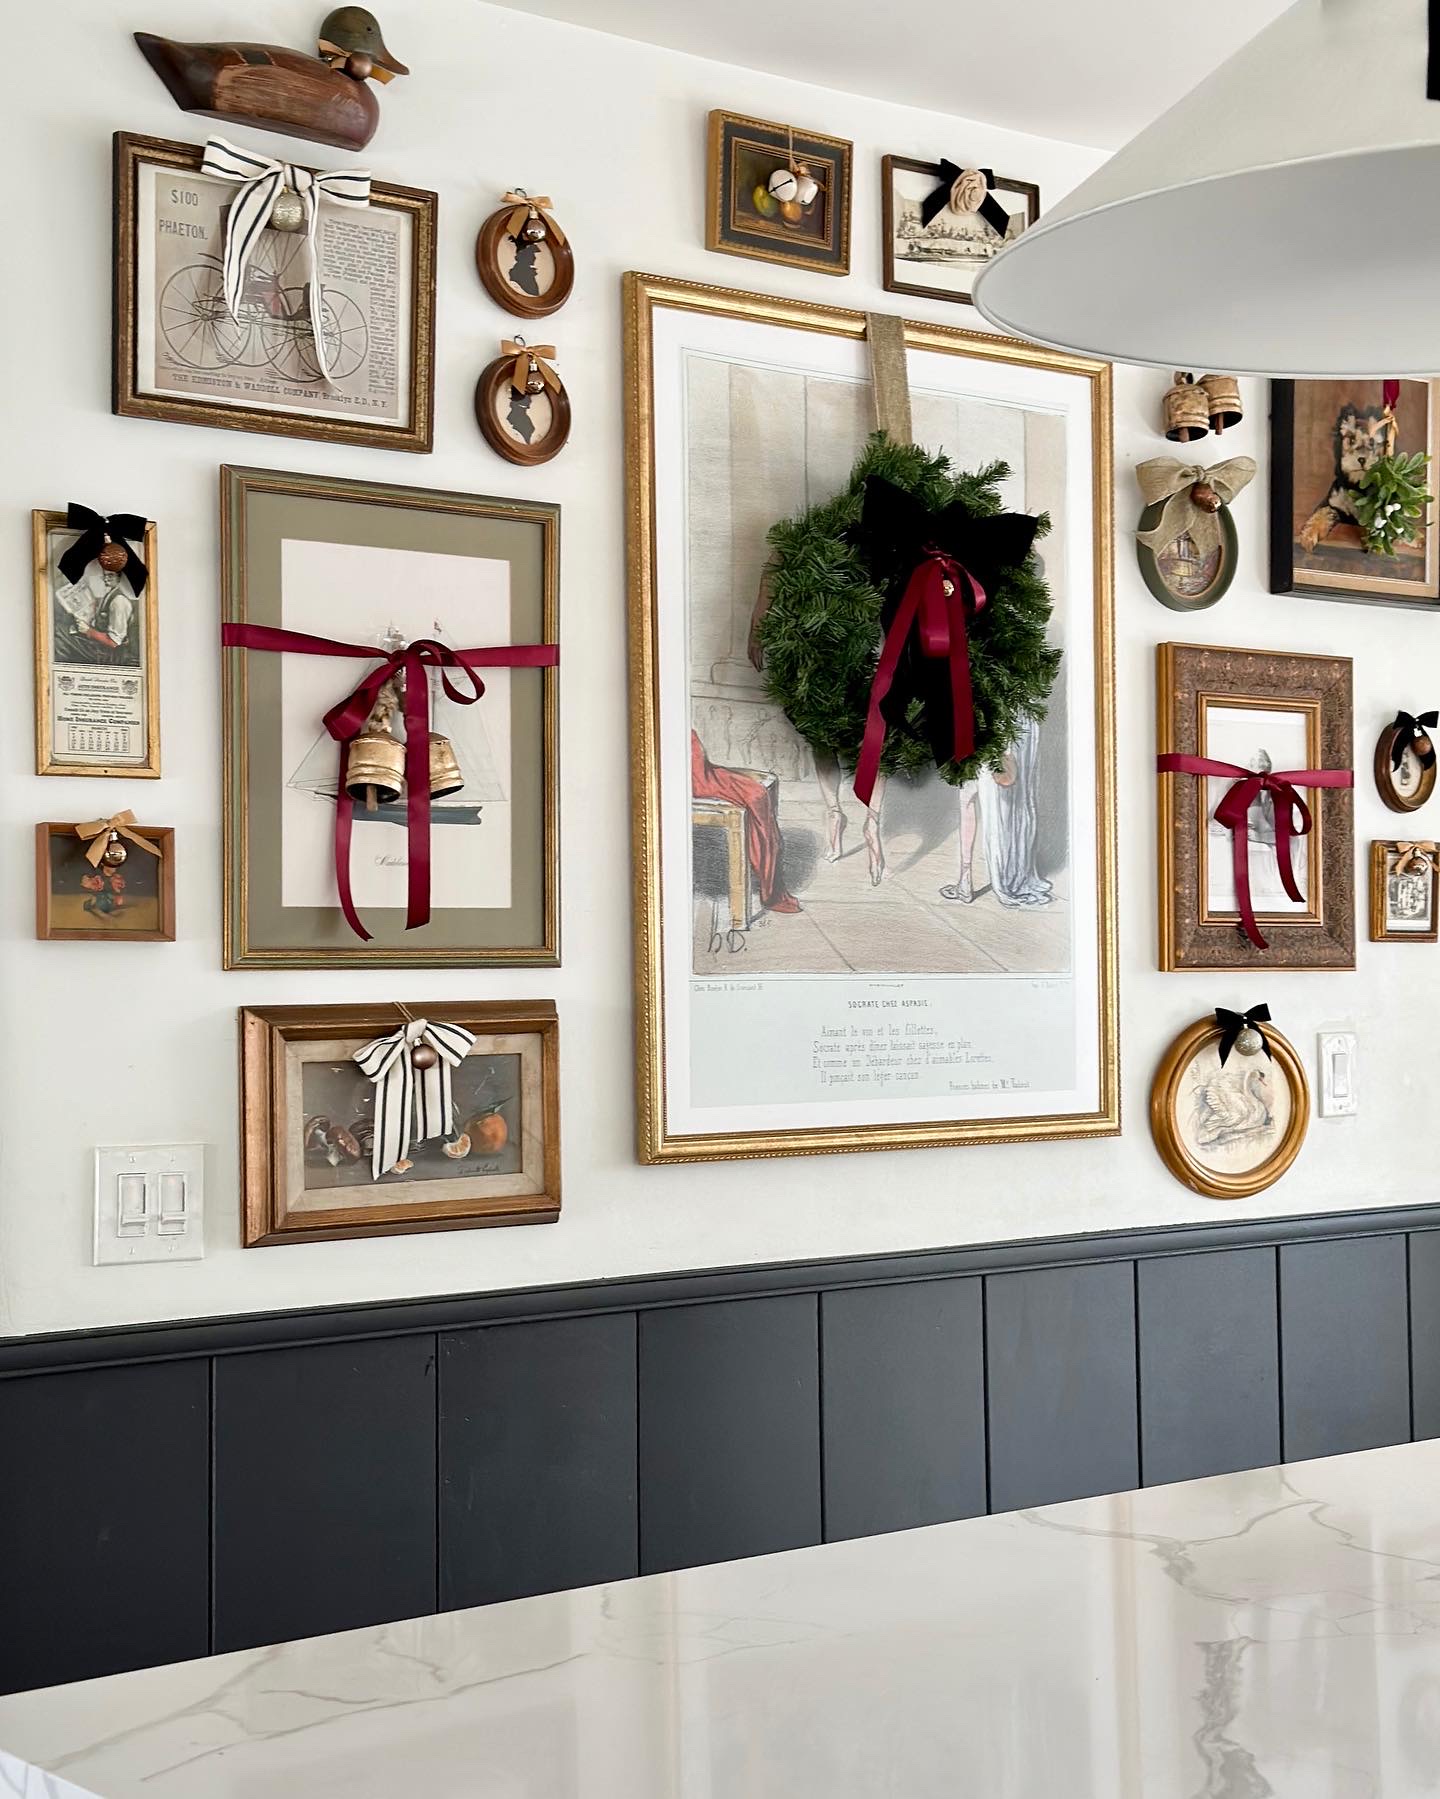 easy and budget friendly ways to decorate for christmas, decorating with bows, decorating art for christmas, christmas decor ideas, bows on frames, decorating art for christmas, christmas diy, framing wrapping paper, decorating gallery wall for christmas, bows on art, wreath on art, black wainscotting, decorating kitchen for christmas